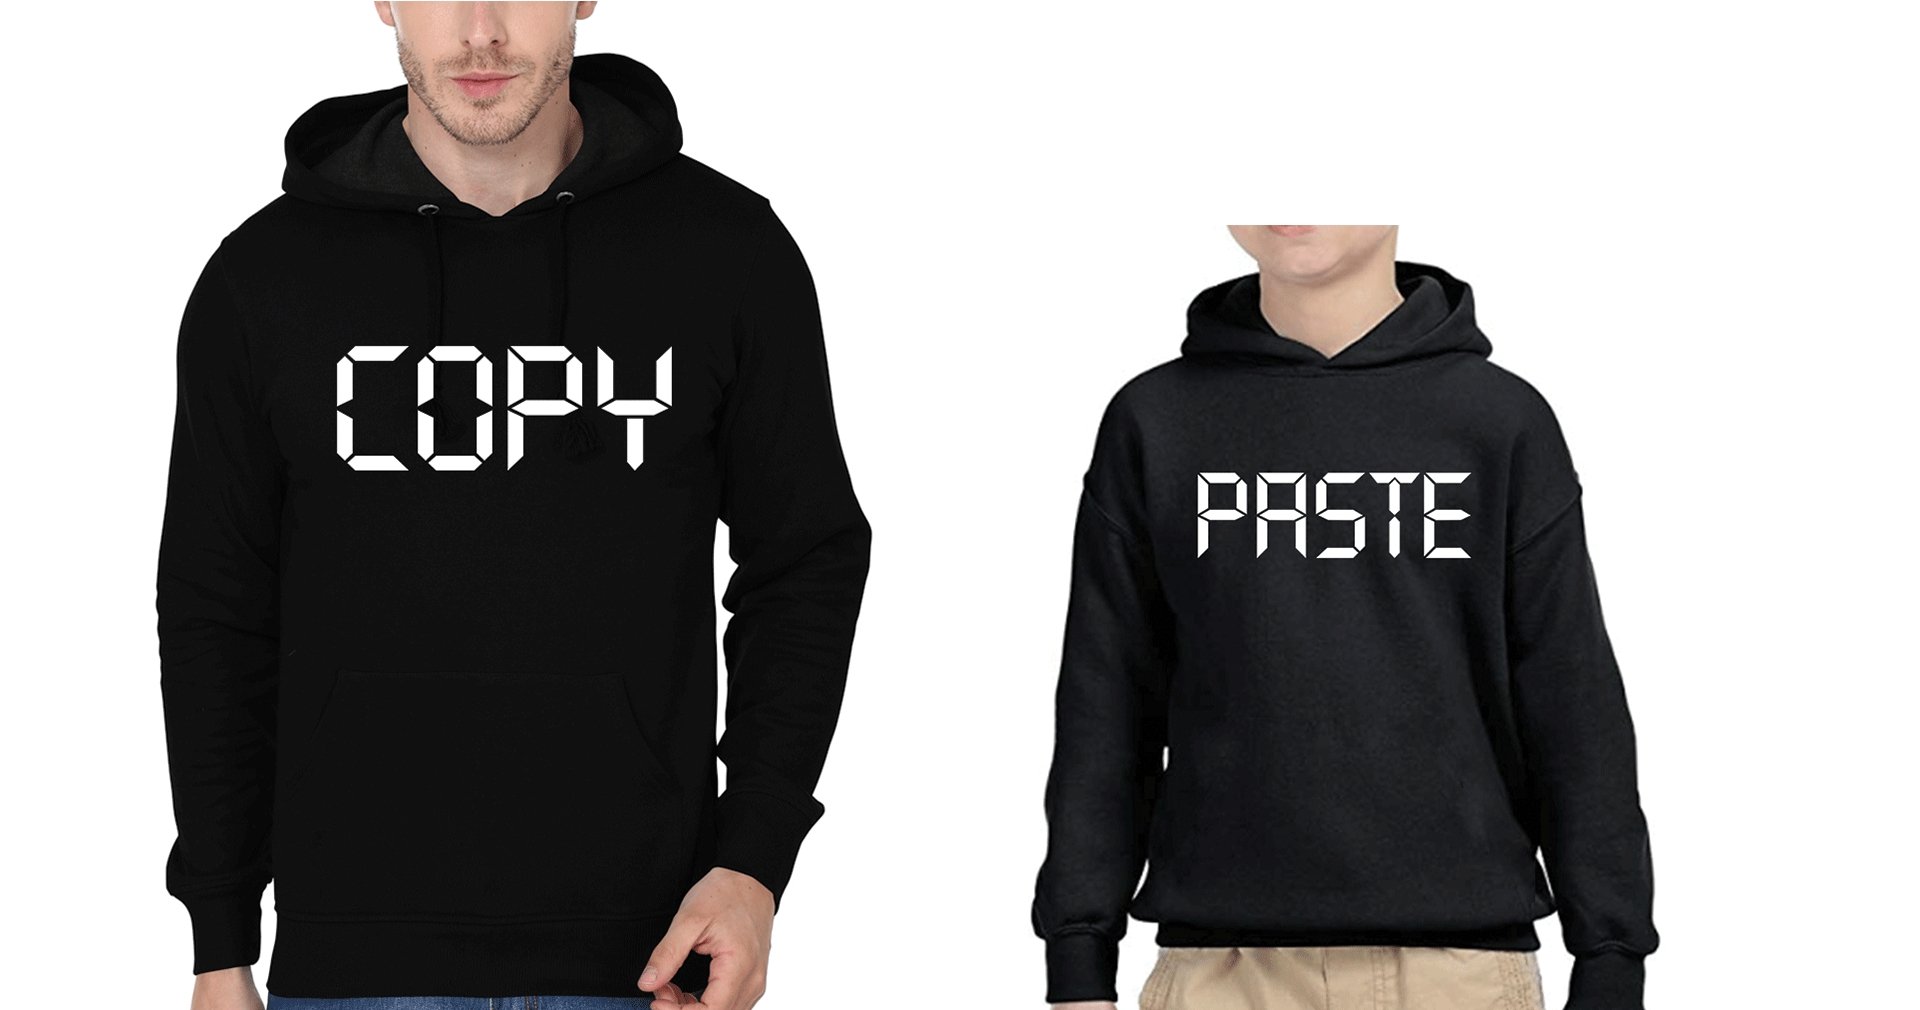 Copy Paste Father and Son Matching Hoodies- FunkyTradition - FunkyTradition